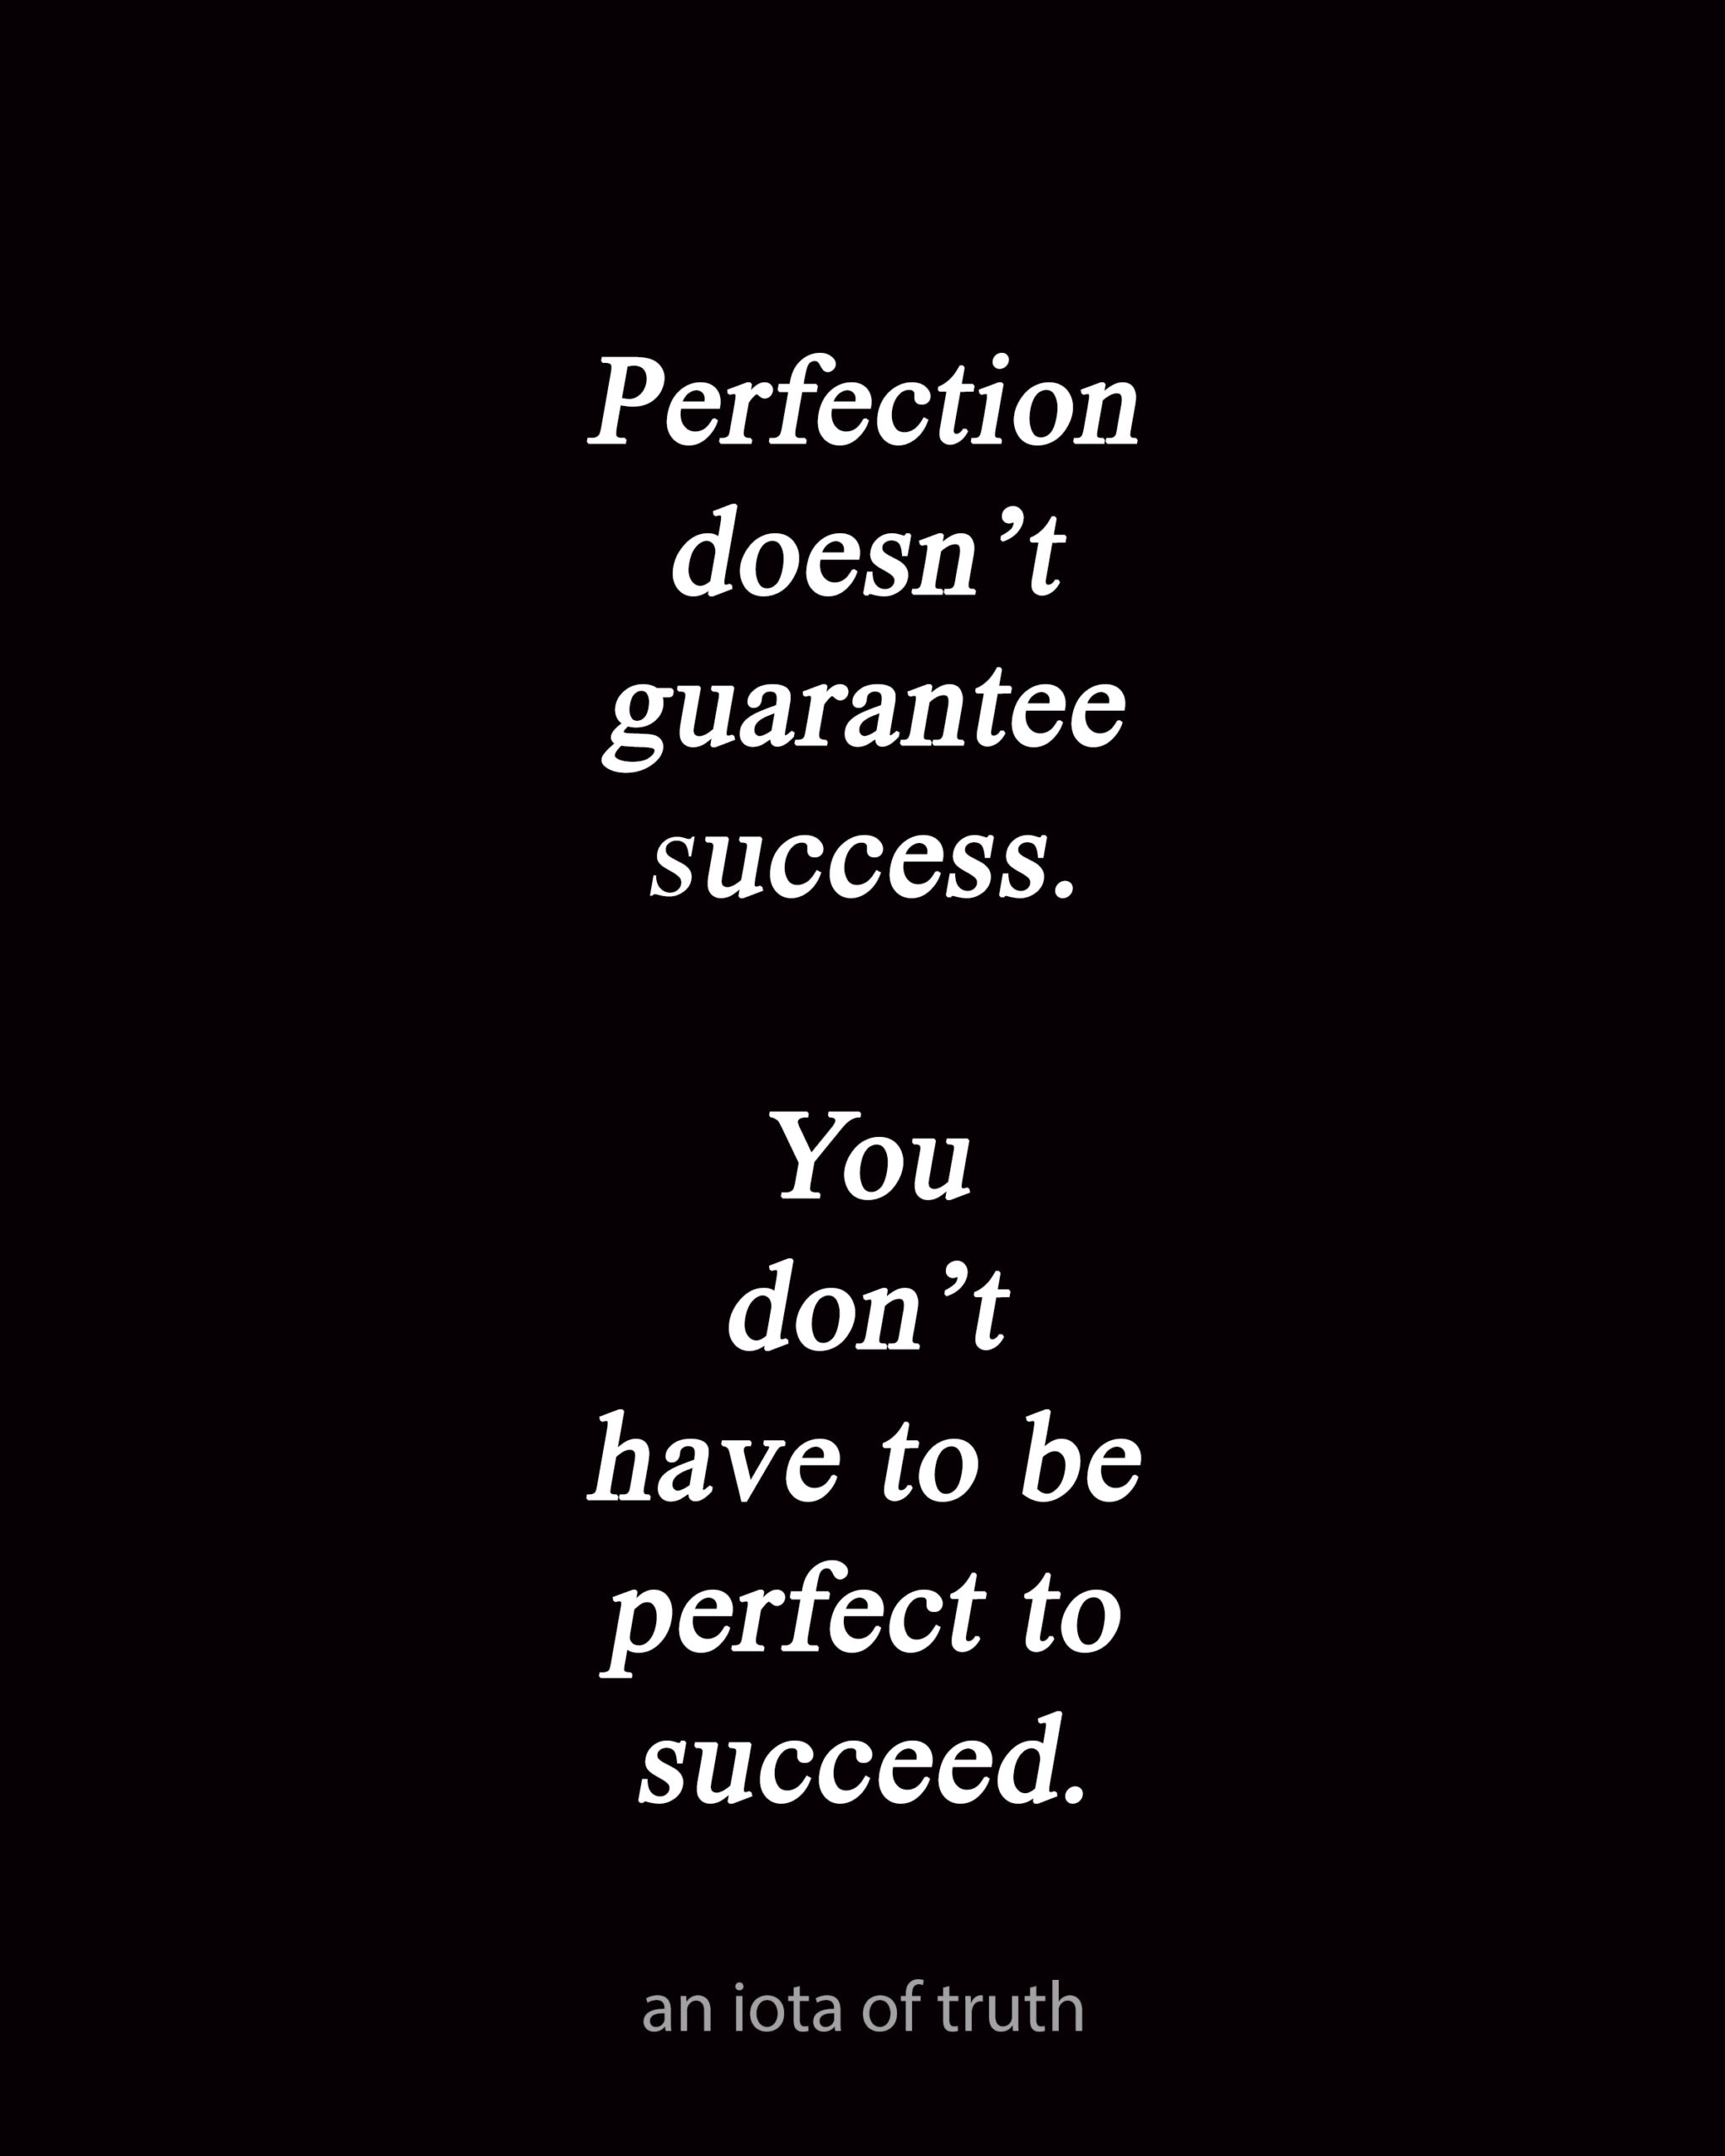 Perfection doesn't guarantee success. You don't have to be perfect to succeed.